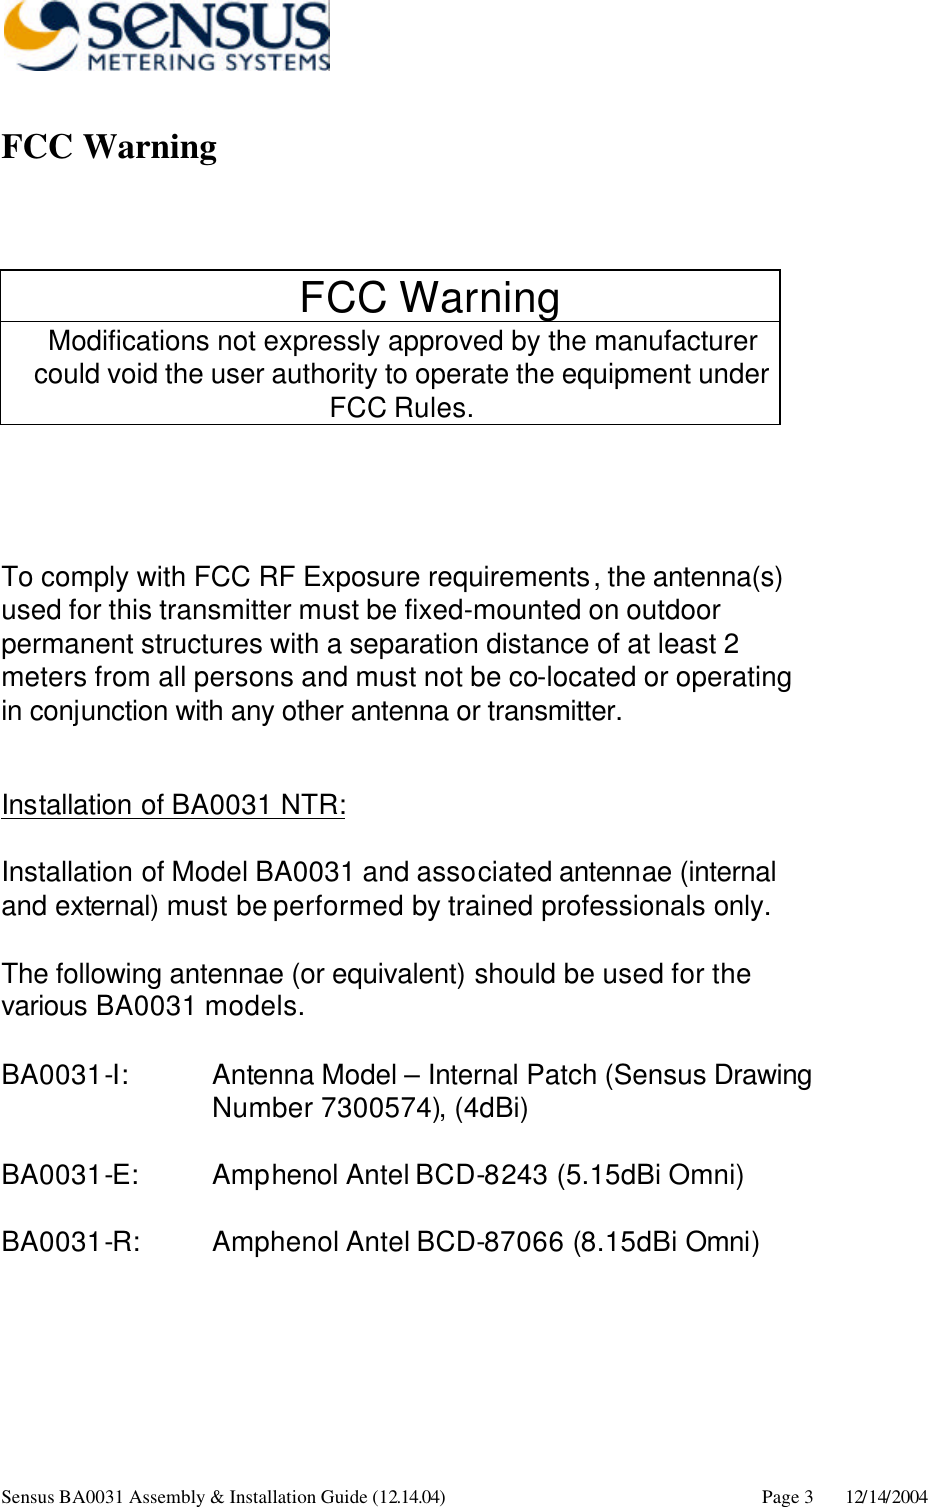      Sensus BA0031 Assembly &amp; Installation Guide (12.14.04) Page 3 12/14/2004 FCC Warning   FCC Warning Modifications not expressly approved by the manufacturer could void the user authority to operate the equipment under FCC Rules.    To comply with FCC RF Exposure requirements, the antenna(s) used for this transmitter must be fixed-mounted on outdoor permanent structures with a separation distance of at least 2 meters from all persons and must not be co-located or operating in conjunction with any other antenna or transmitter.  Installation of BA0031 NTR:  Installation of Model BA0031 and associated antennae (internal and external) must be performed by trained professionals only.    The following antennae (or equivalent) should be used for the various BA0031 models.  BA0031-I:      Antenna Model – Internal Patch (Sensus Drawing Number 7300574), (4dBi)   BA0031-E:   Amphenol Antel BCD-8243 (5.15dBi Omni)  BA0031-R: Amphenol Antel BCD-87066 (8.15dBi Omni) 